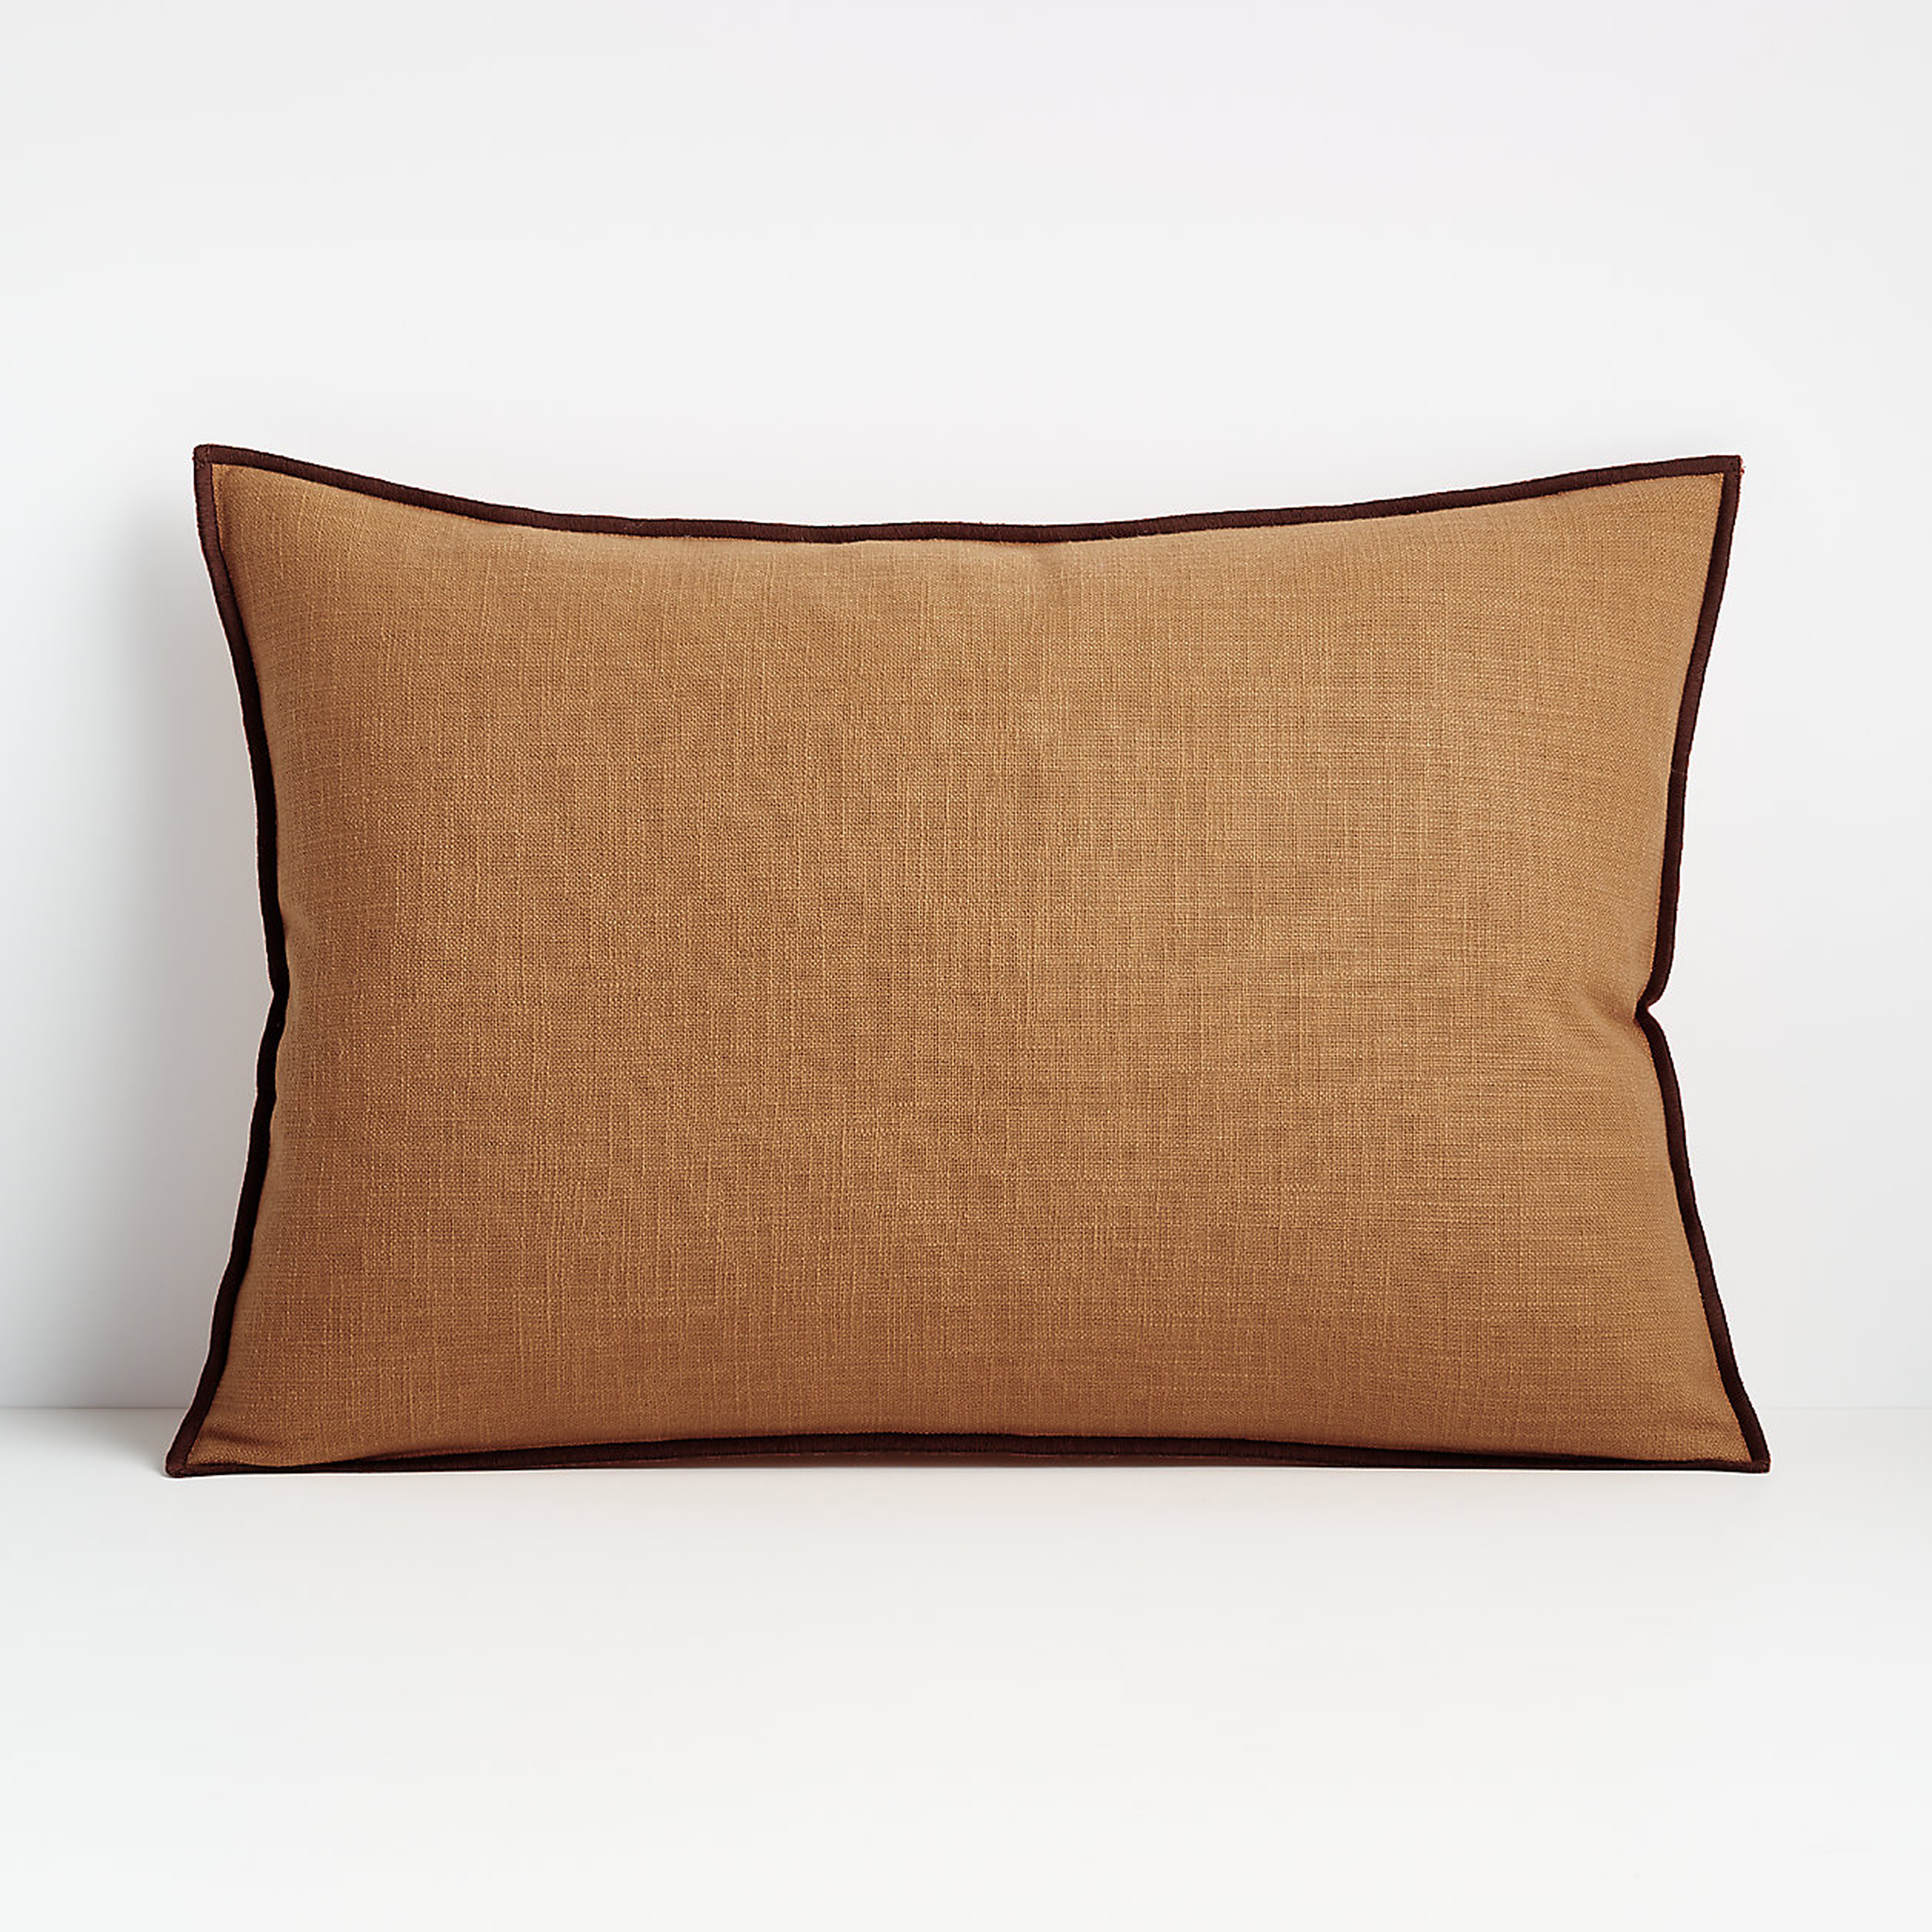 Ori Amber 22"x15" Pillow with Down-Alternative Insert - Crate and Barrel